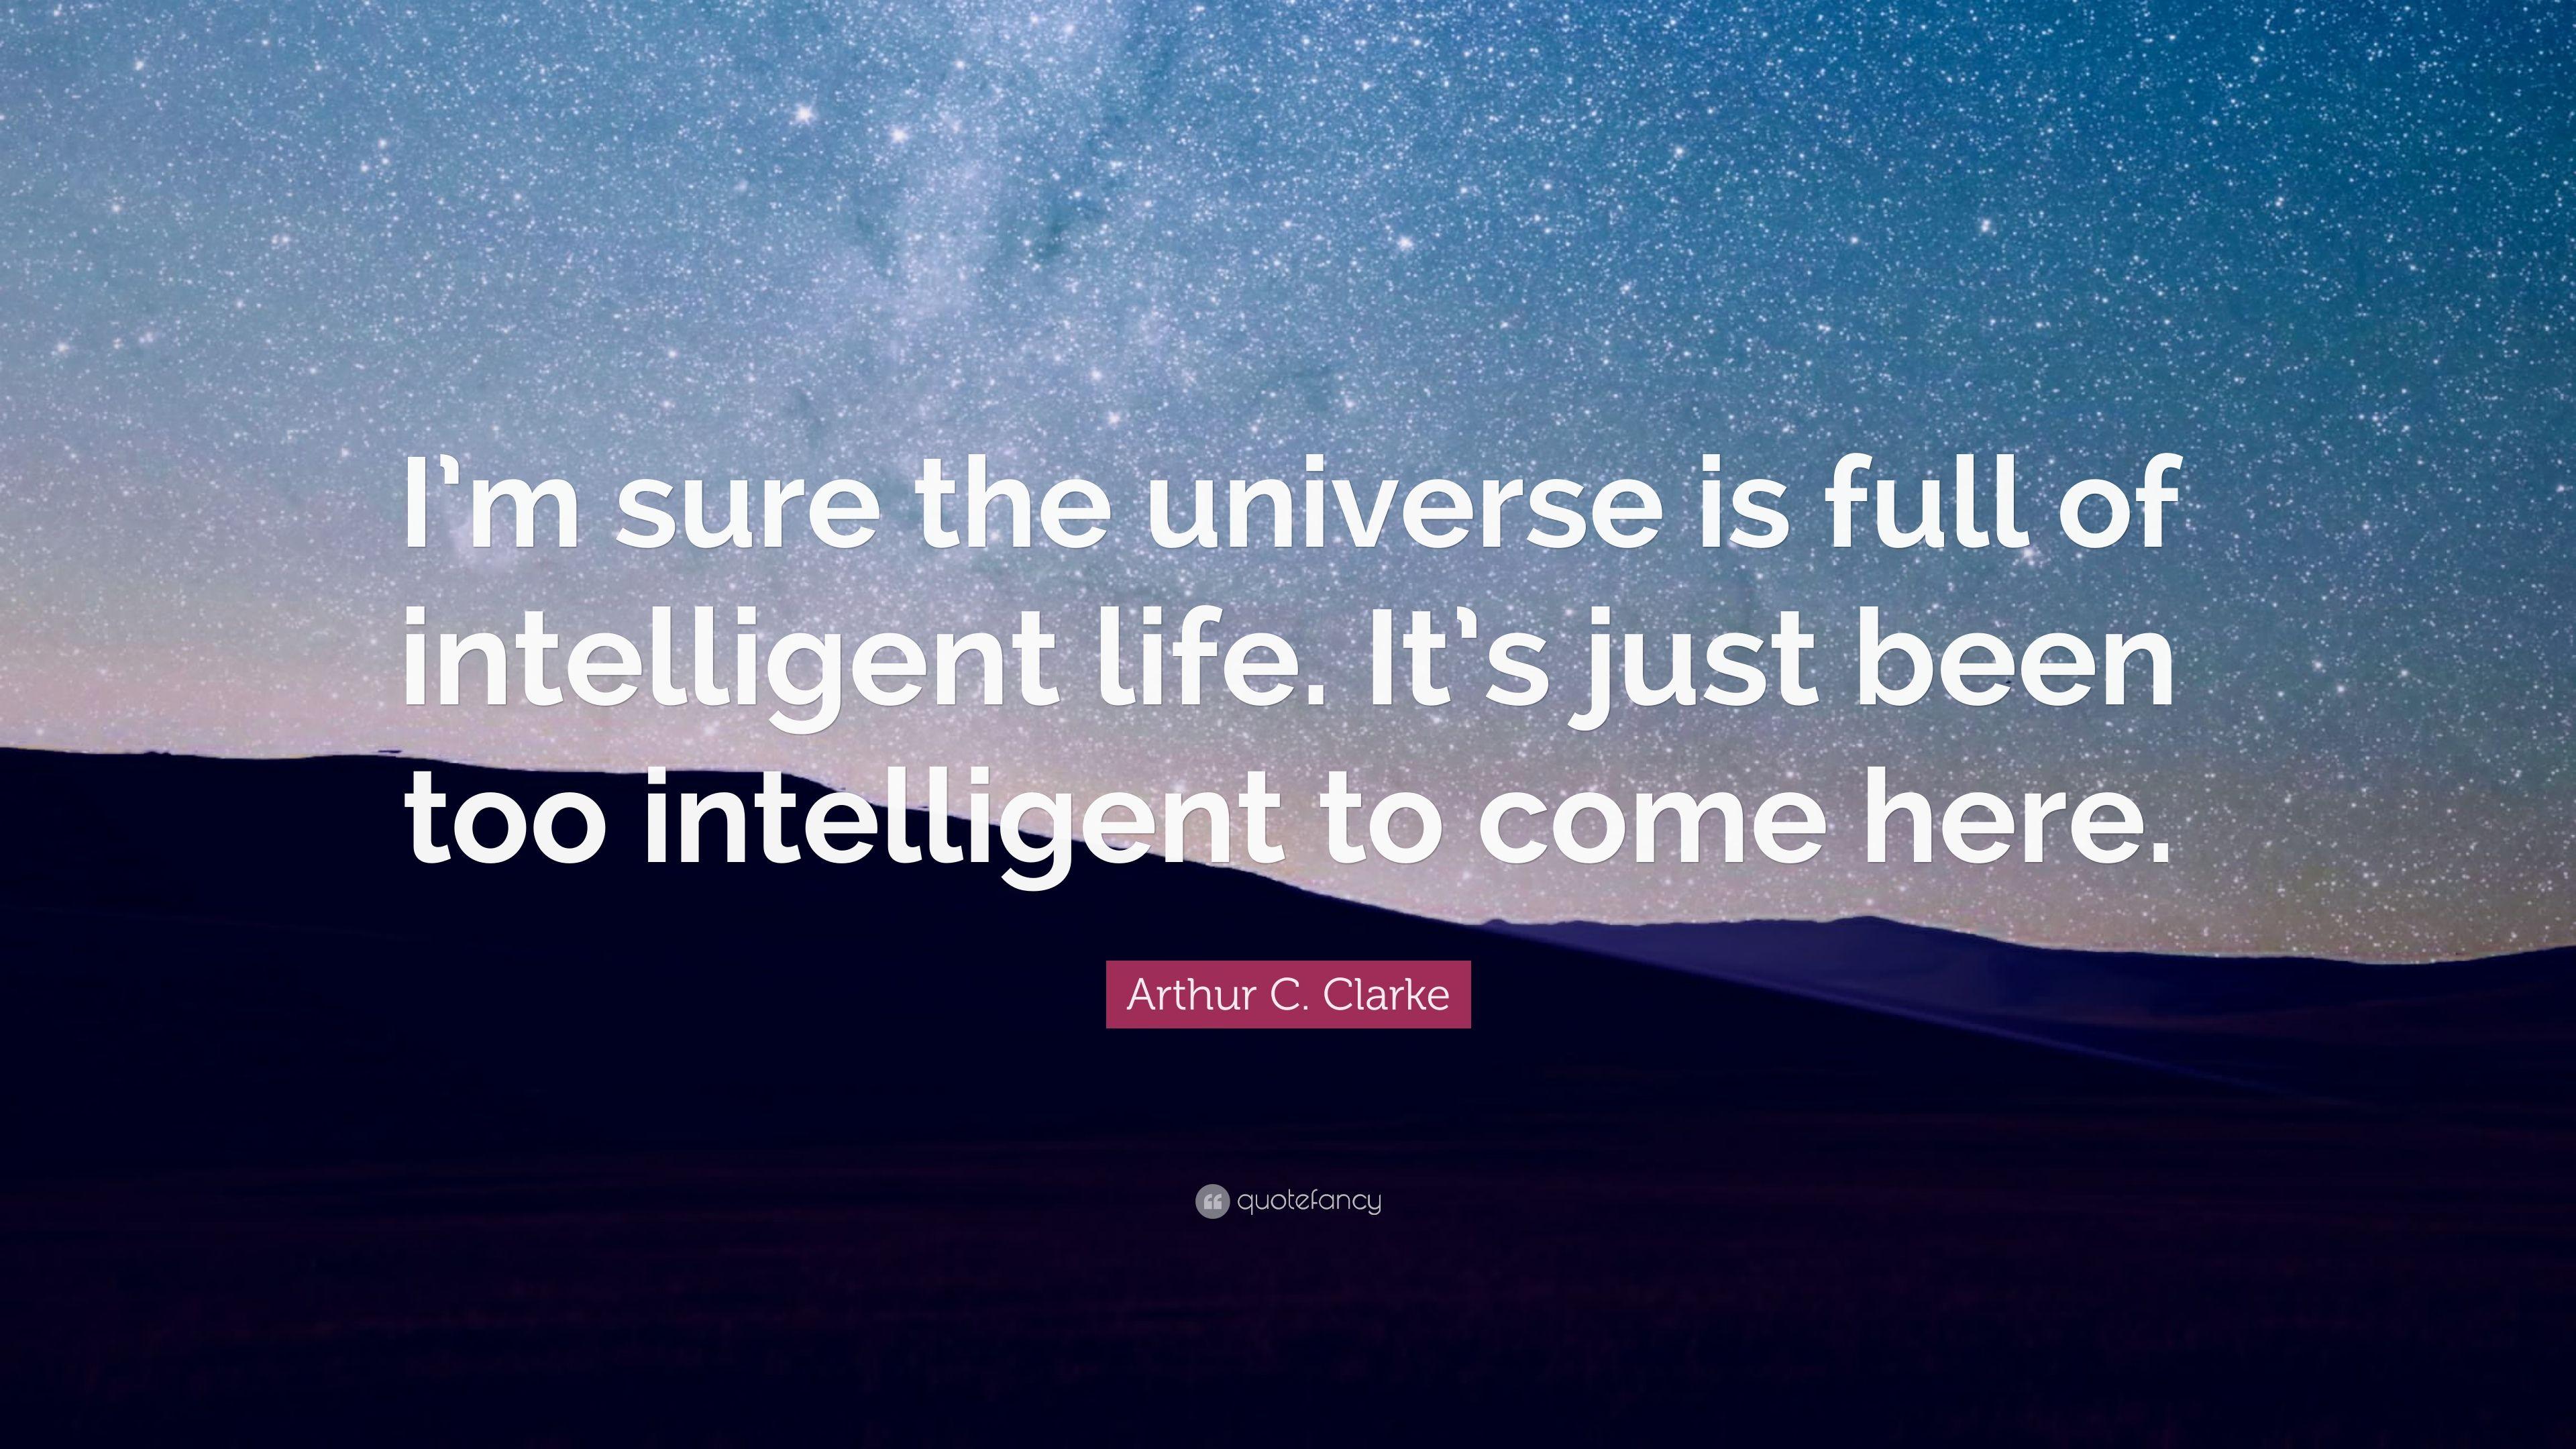 Intelligent Quotes About Life Intelligent Quotes 40 Wallpaper